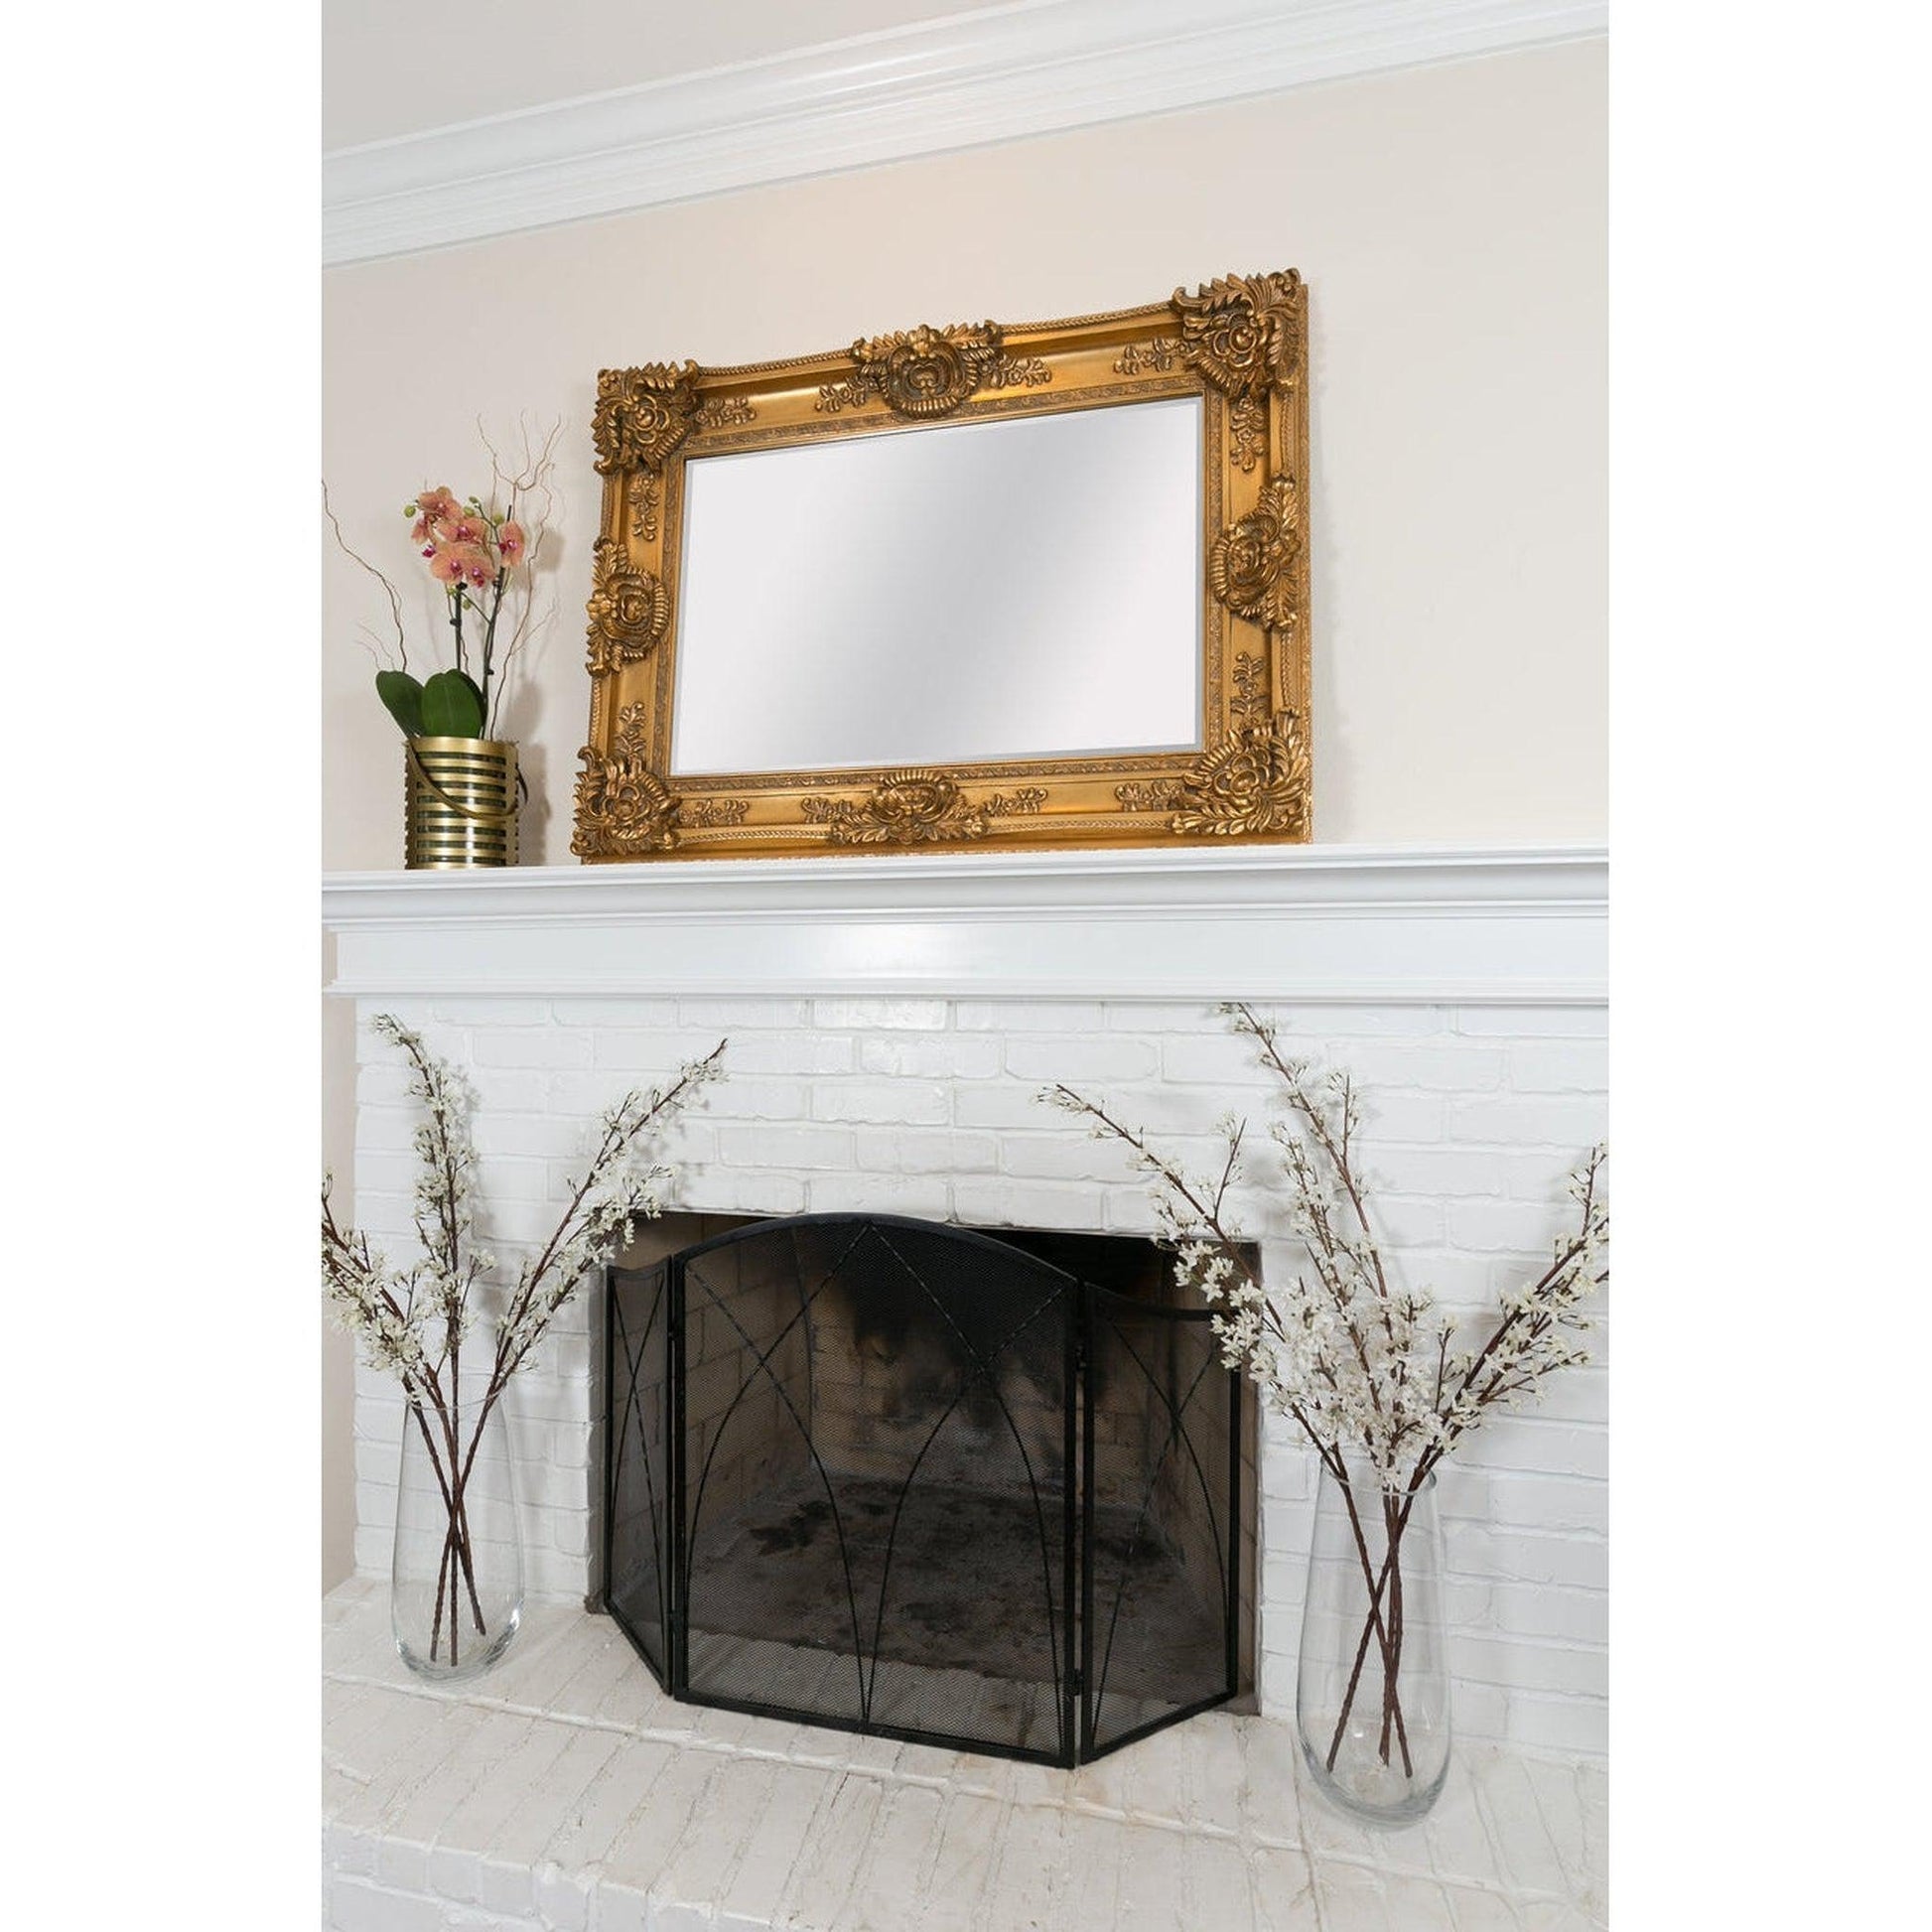 SBC Decor Mayfair Large 35" x 48" Wall-Mounted Full Length Wood Frame Dresser Large Wall Mirror In Antique Gold Finish